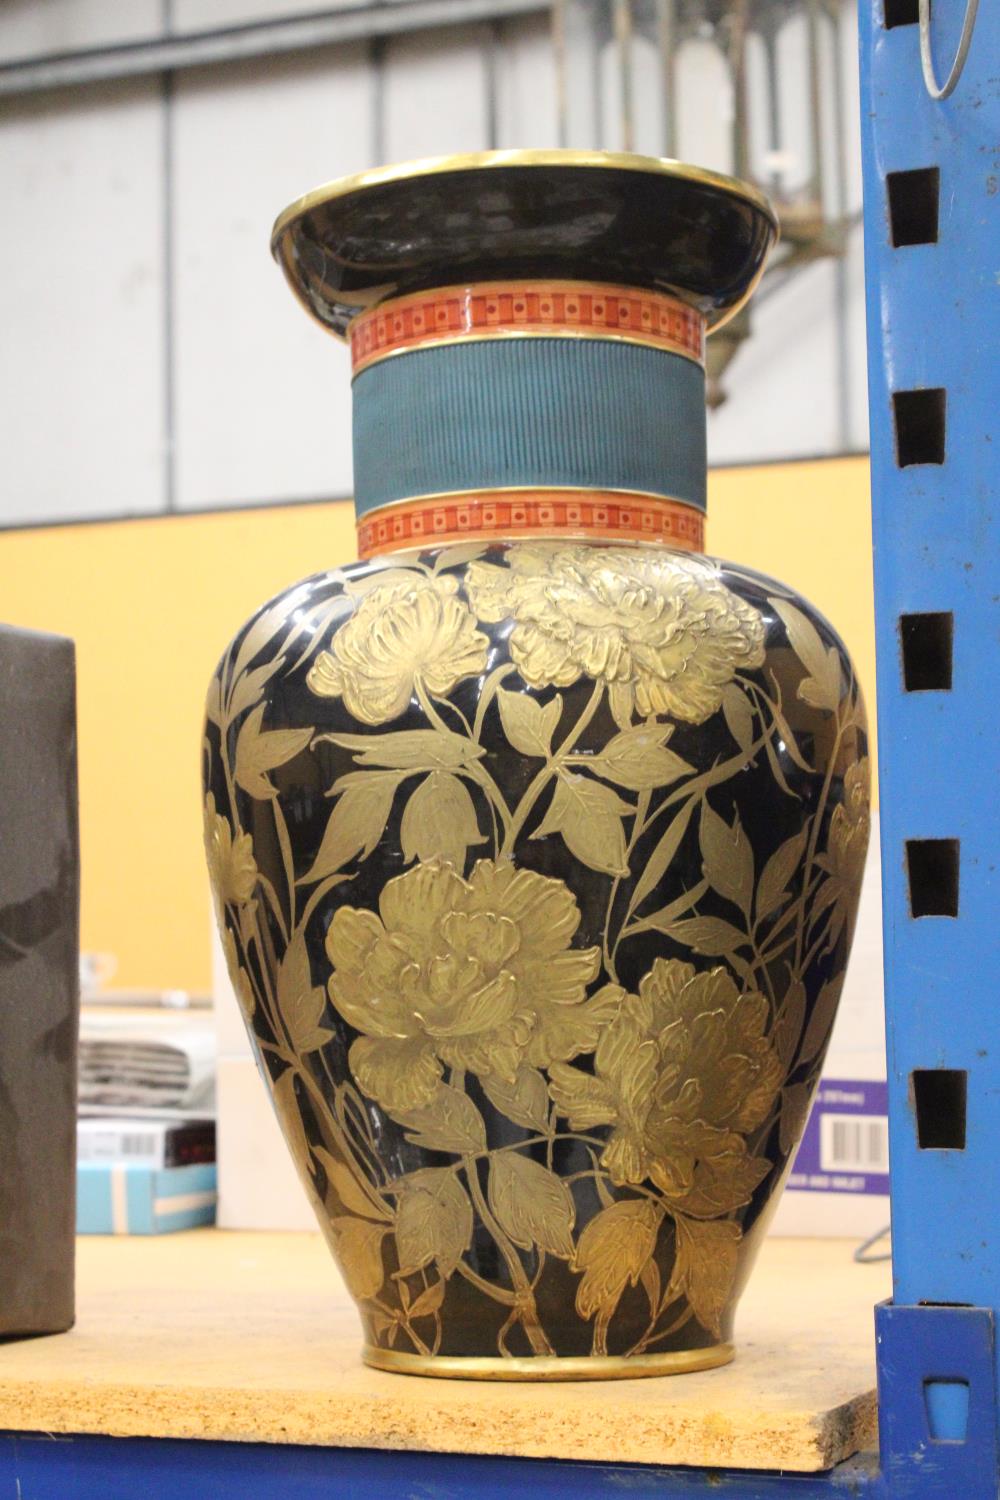 A LARGE VASE WITH GOLD EMBOSSED FLORALS PAINTED IN 22 CT GOLD - Image 2 of 4